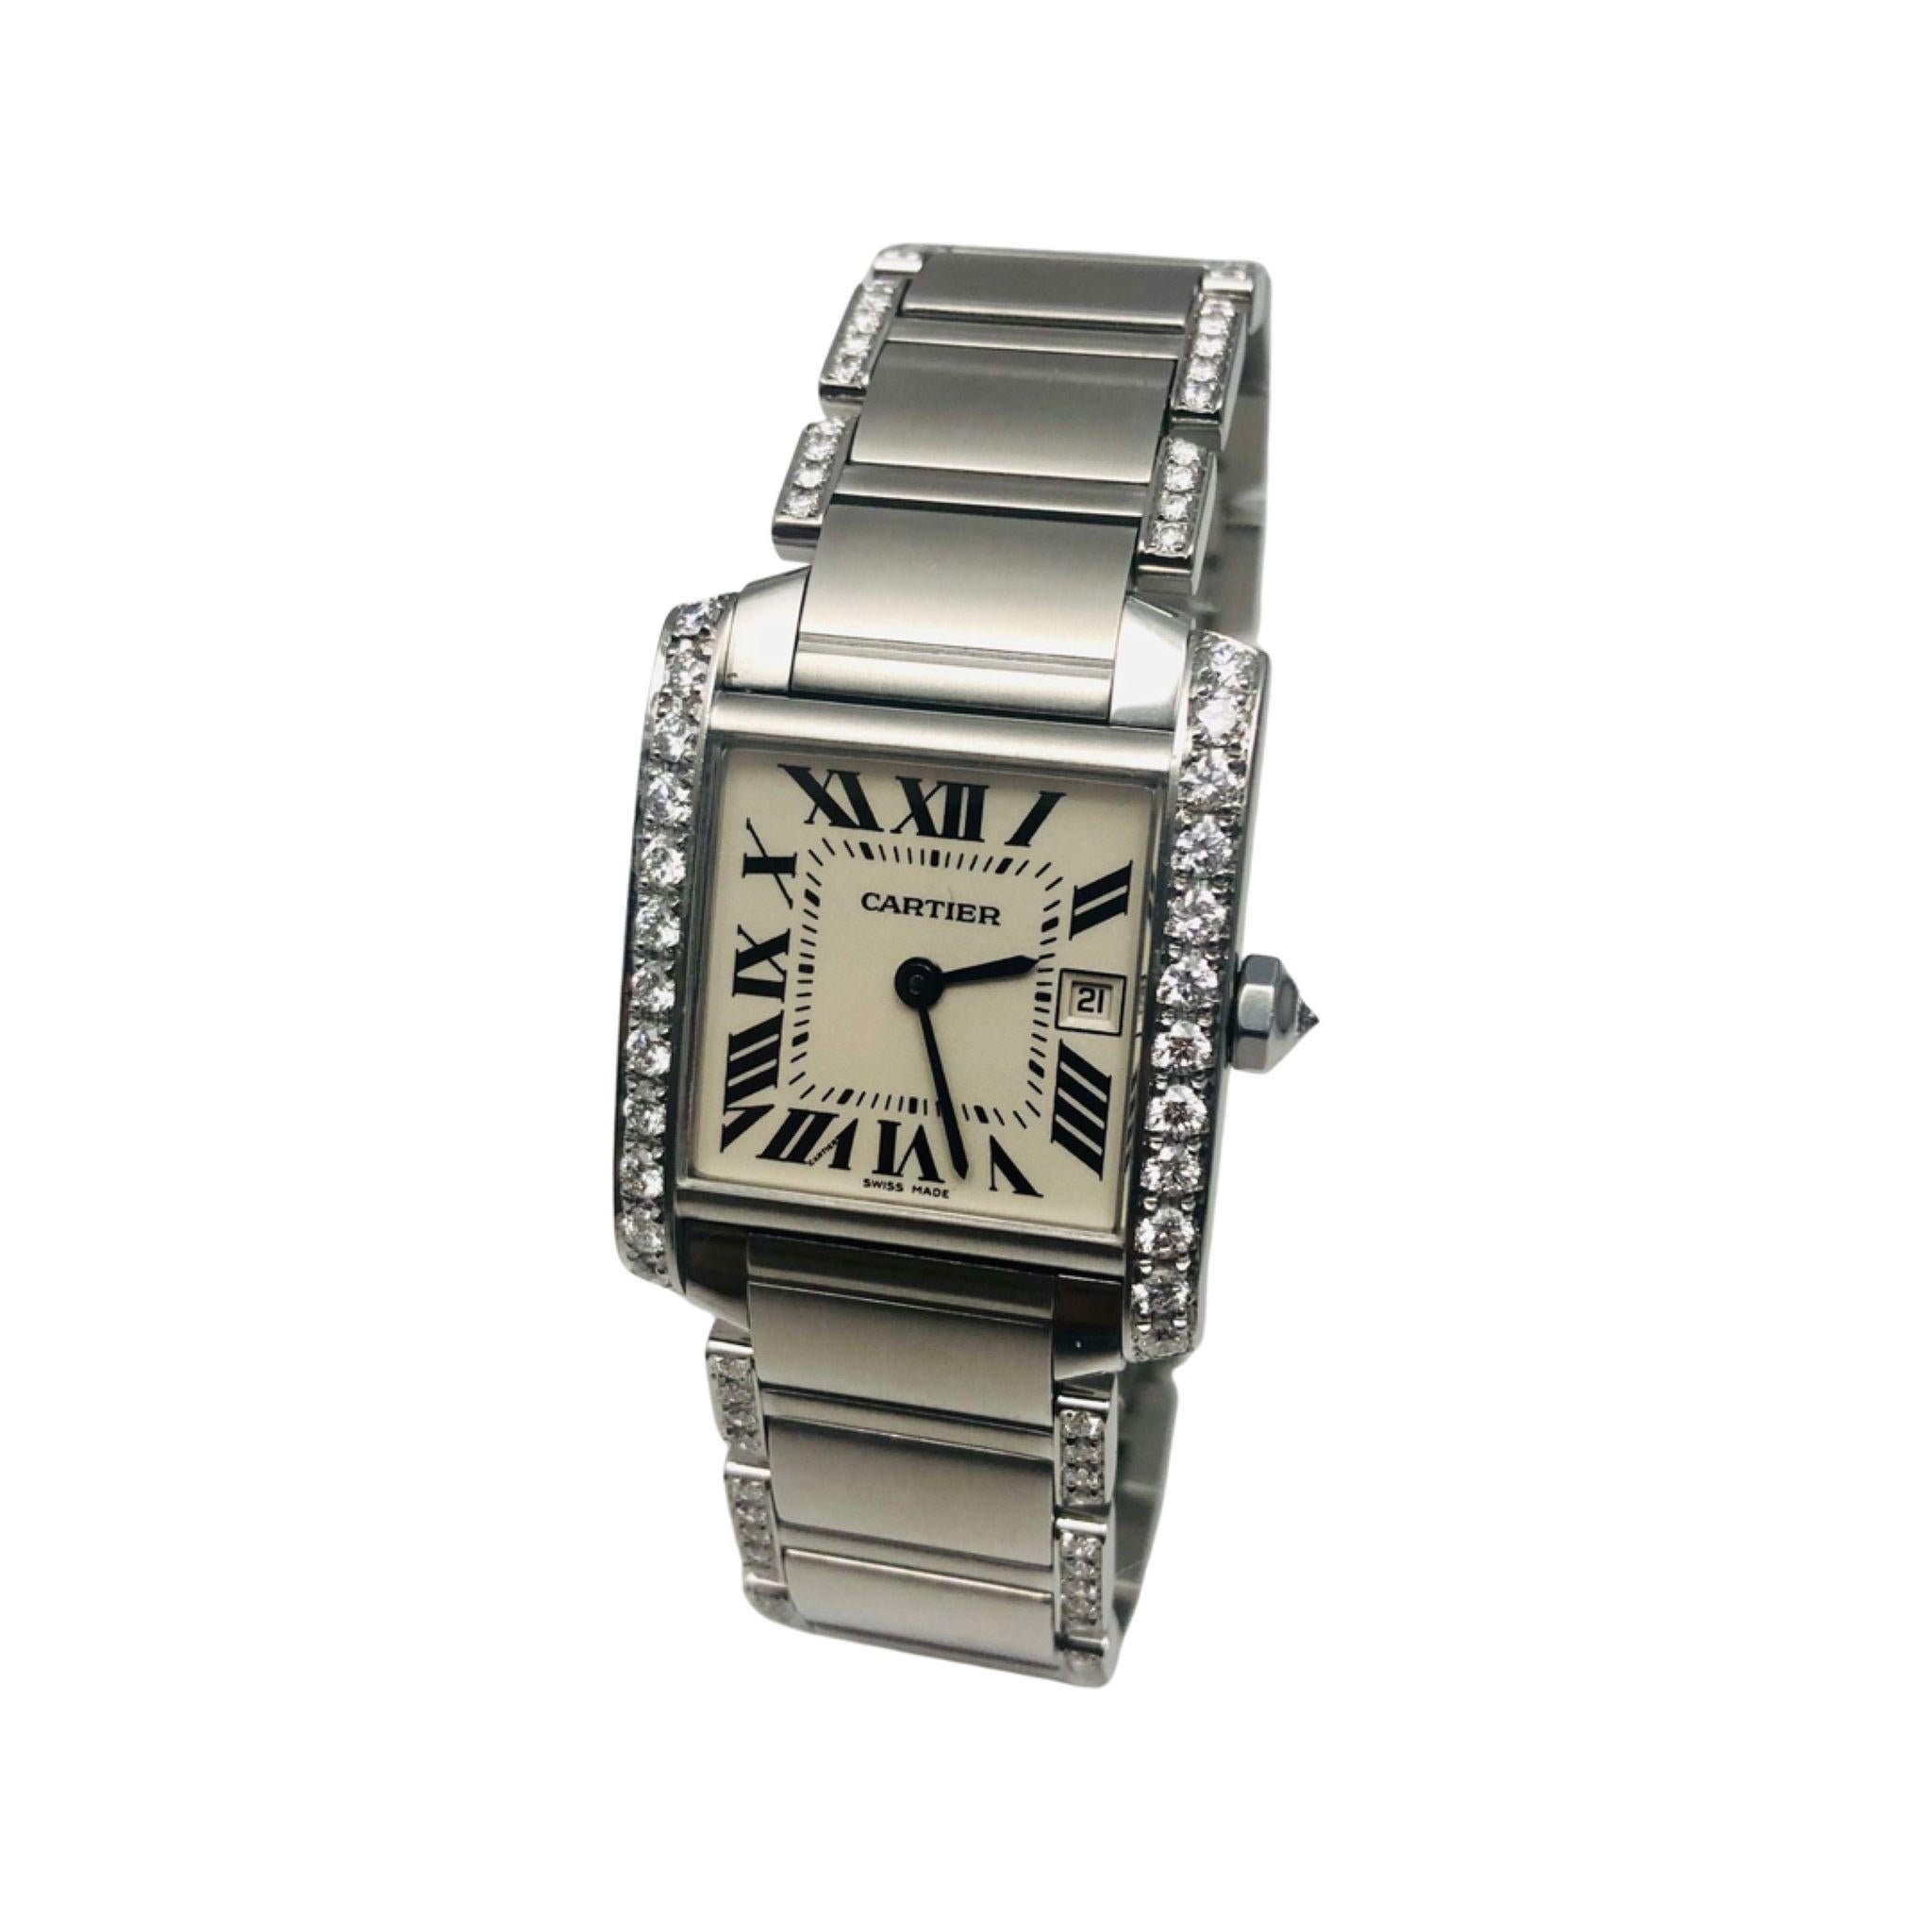 Cartier Tank Francaise Stainless Steel Diamond Case/Bracelet Ref. 2465 In Good Condition For Sale In Miami, FL